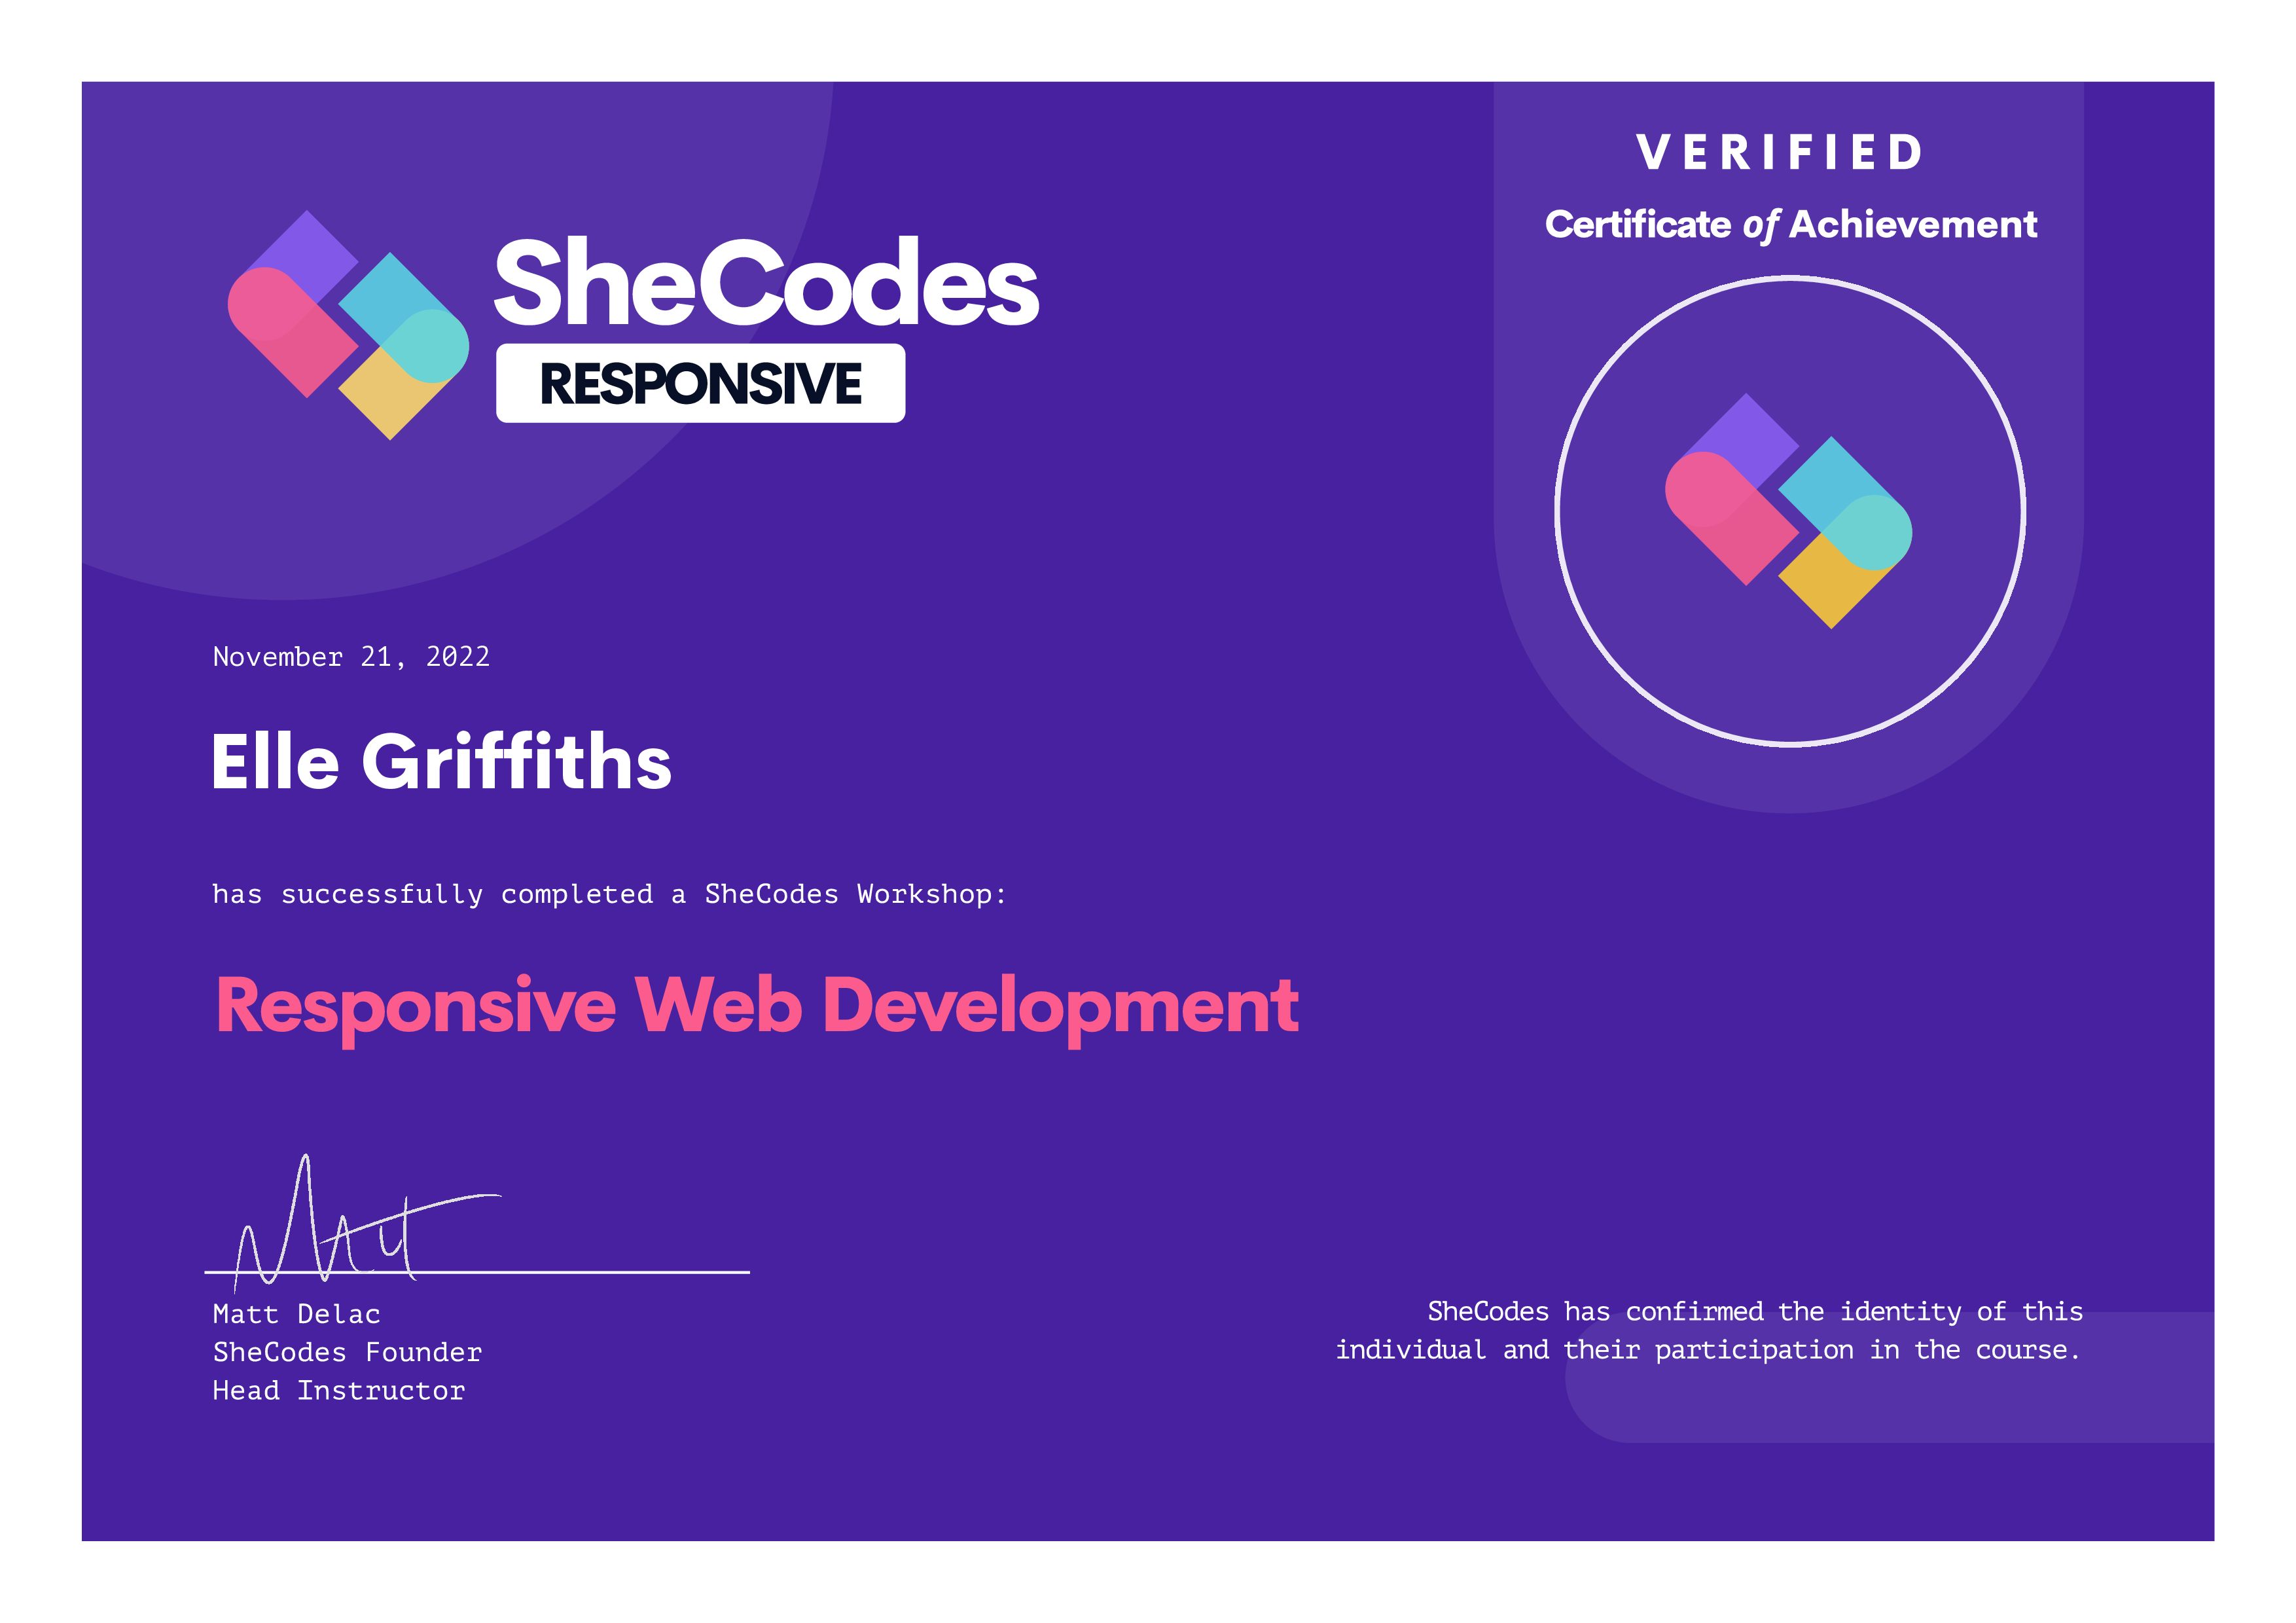 Certificate for completing Shecodes responsive web development course.